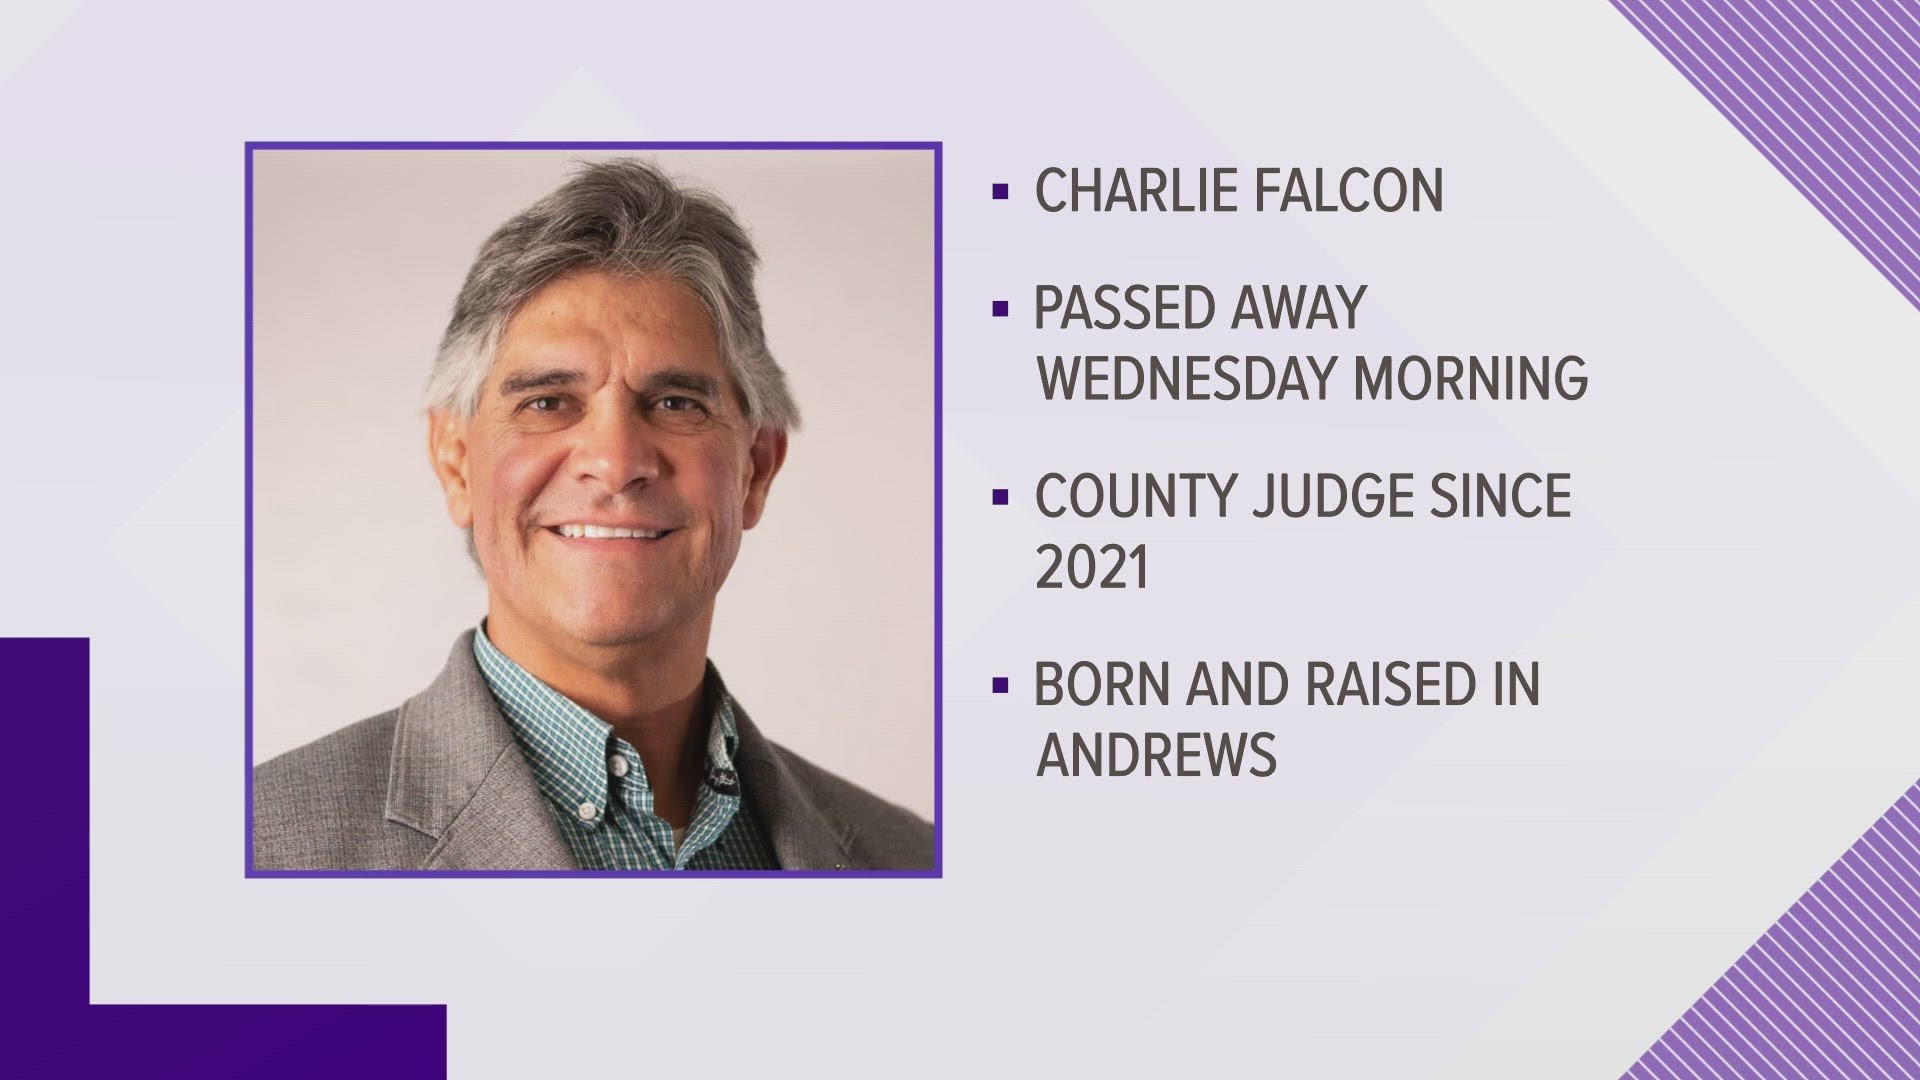 According to Andrews County, Charlie Falcon passed Wednesday morning. County building flags will be flown half-mast through Jan. 5.